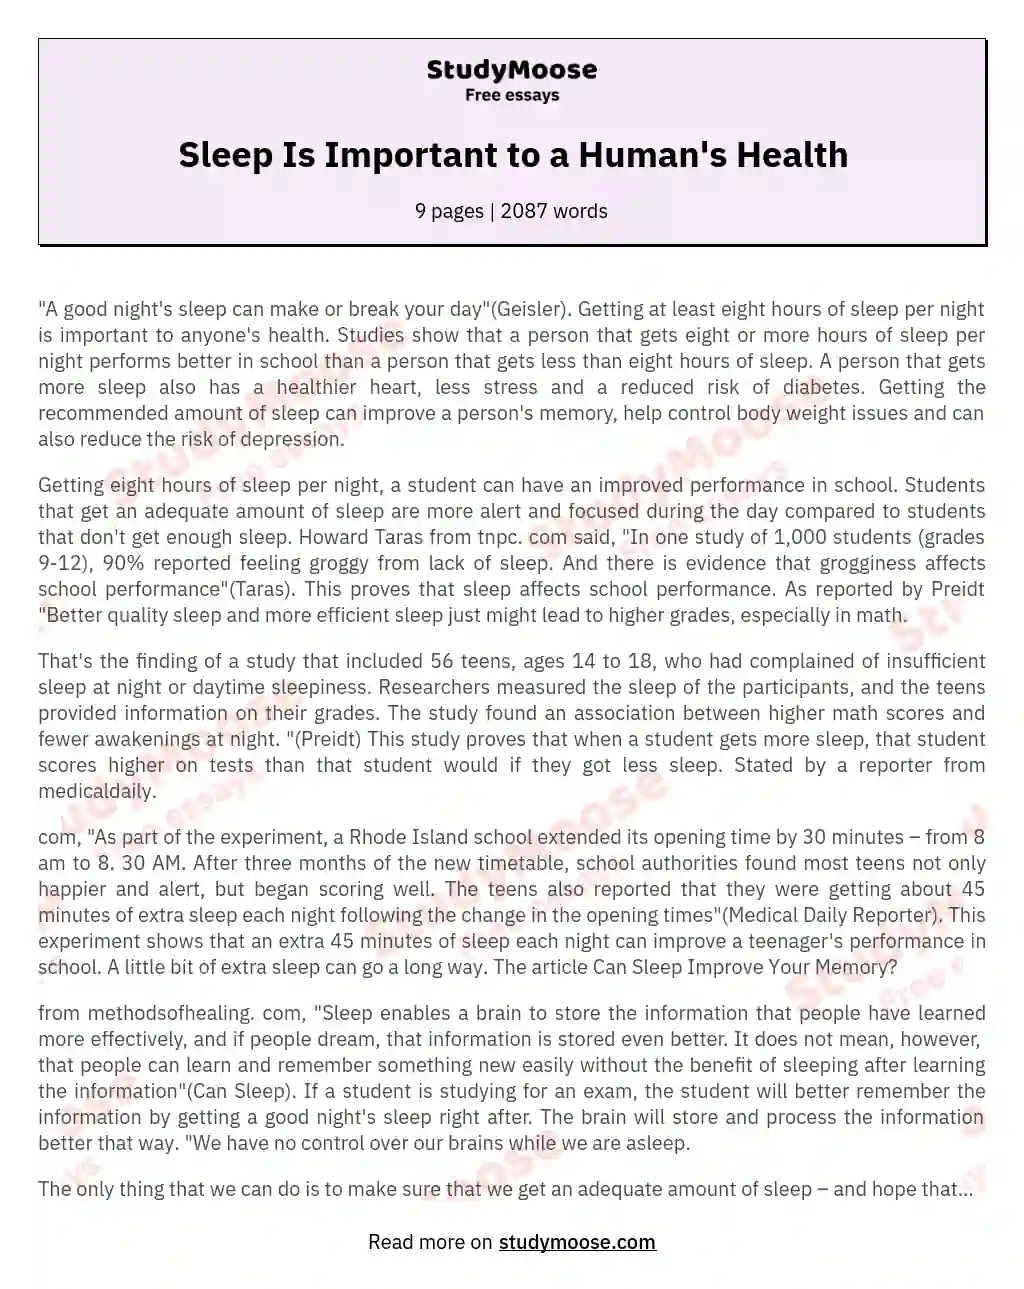 Sleep Is Important to a Human's Health essay